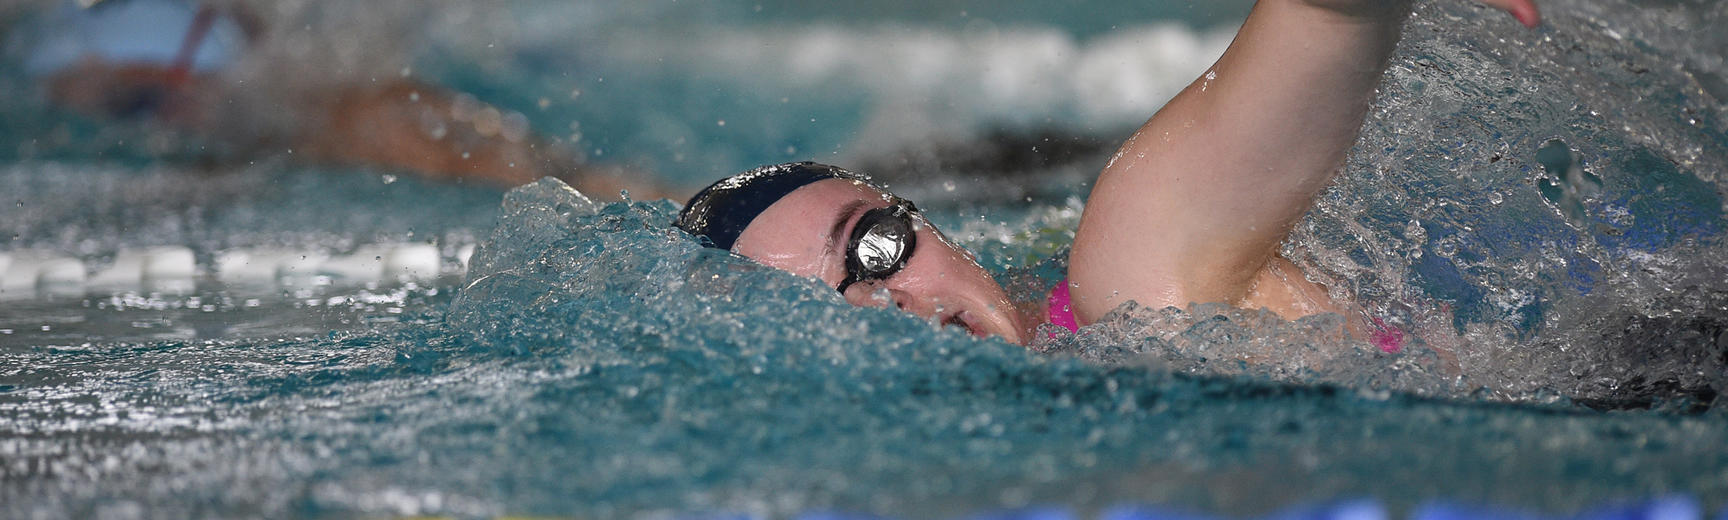 A swimming performing the front crawl - Oxford University images